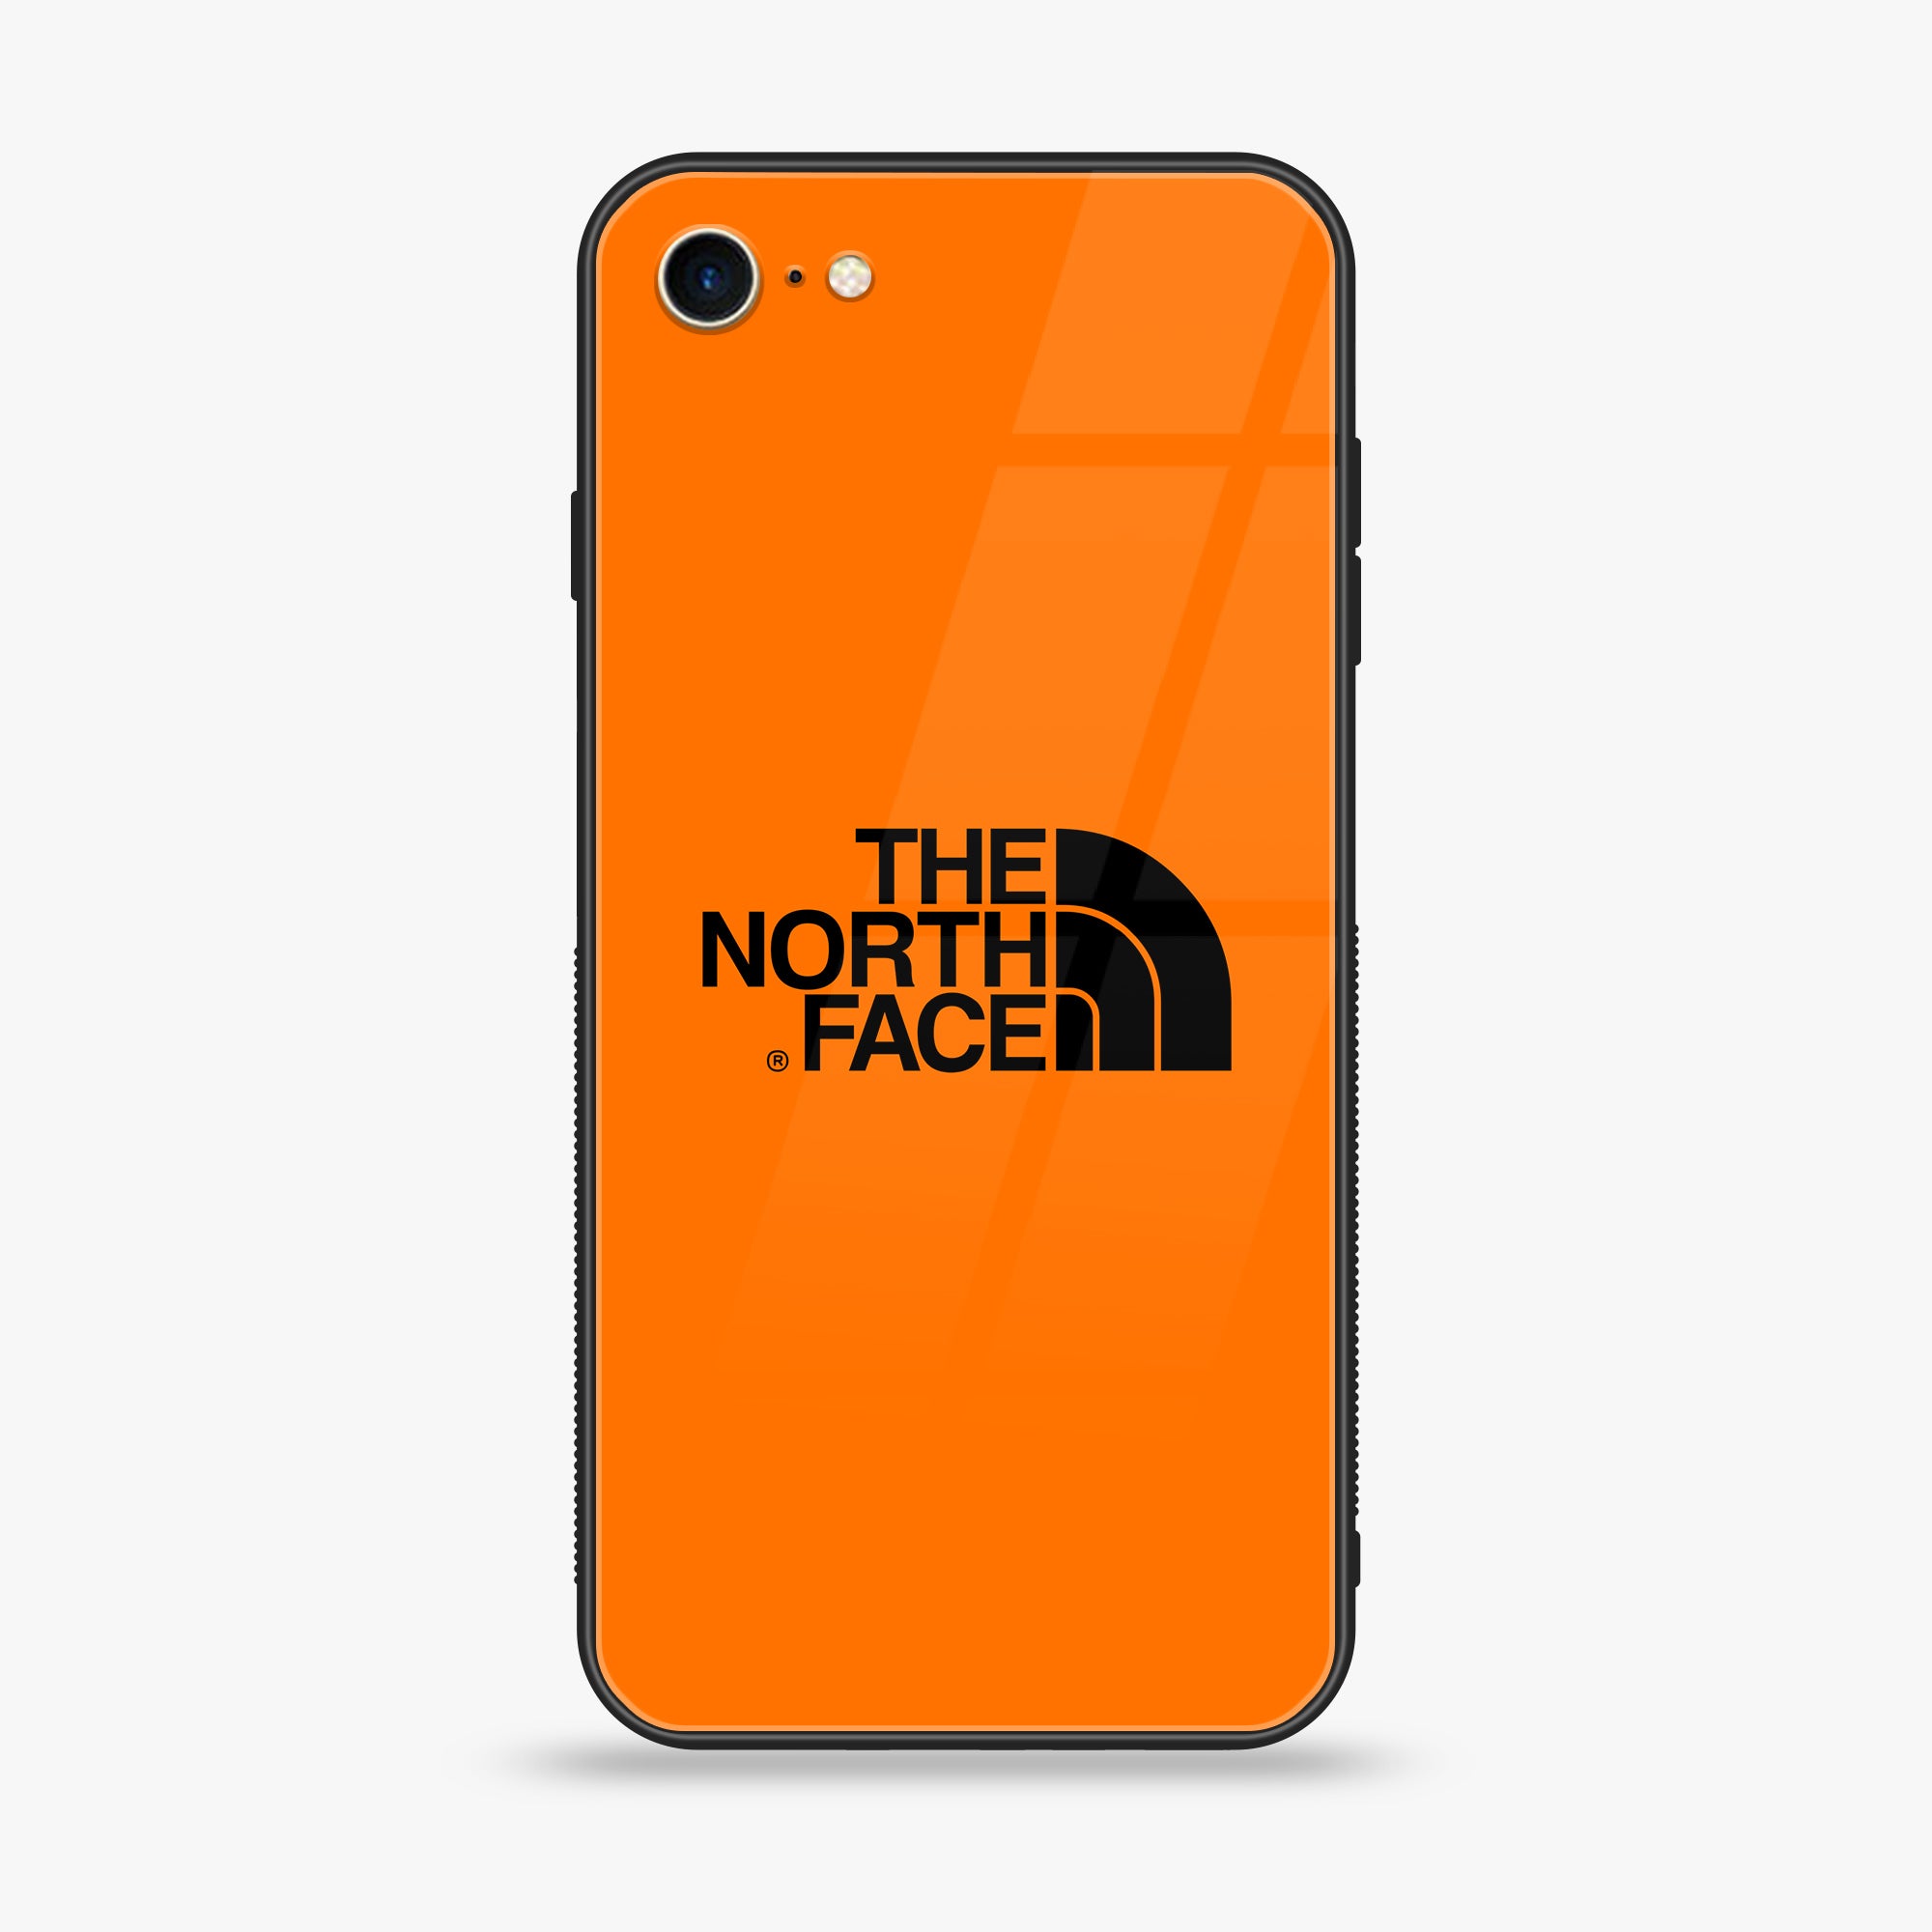 iPhone 6 - The North Face Series - Premium Printed Glass soft Bumper shock Proof Case